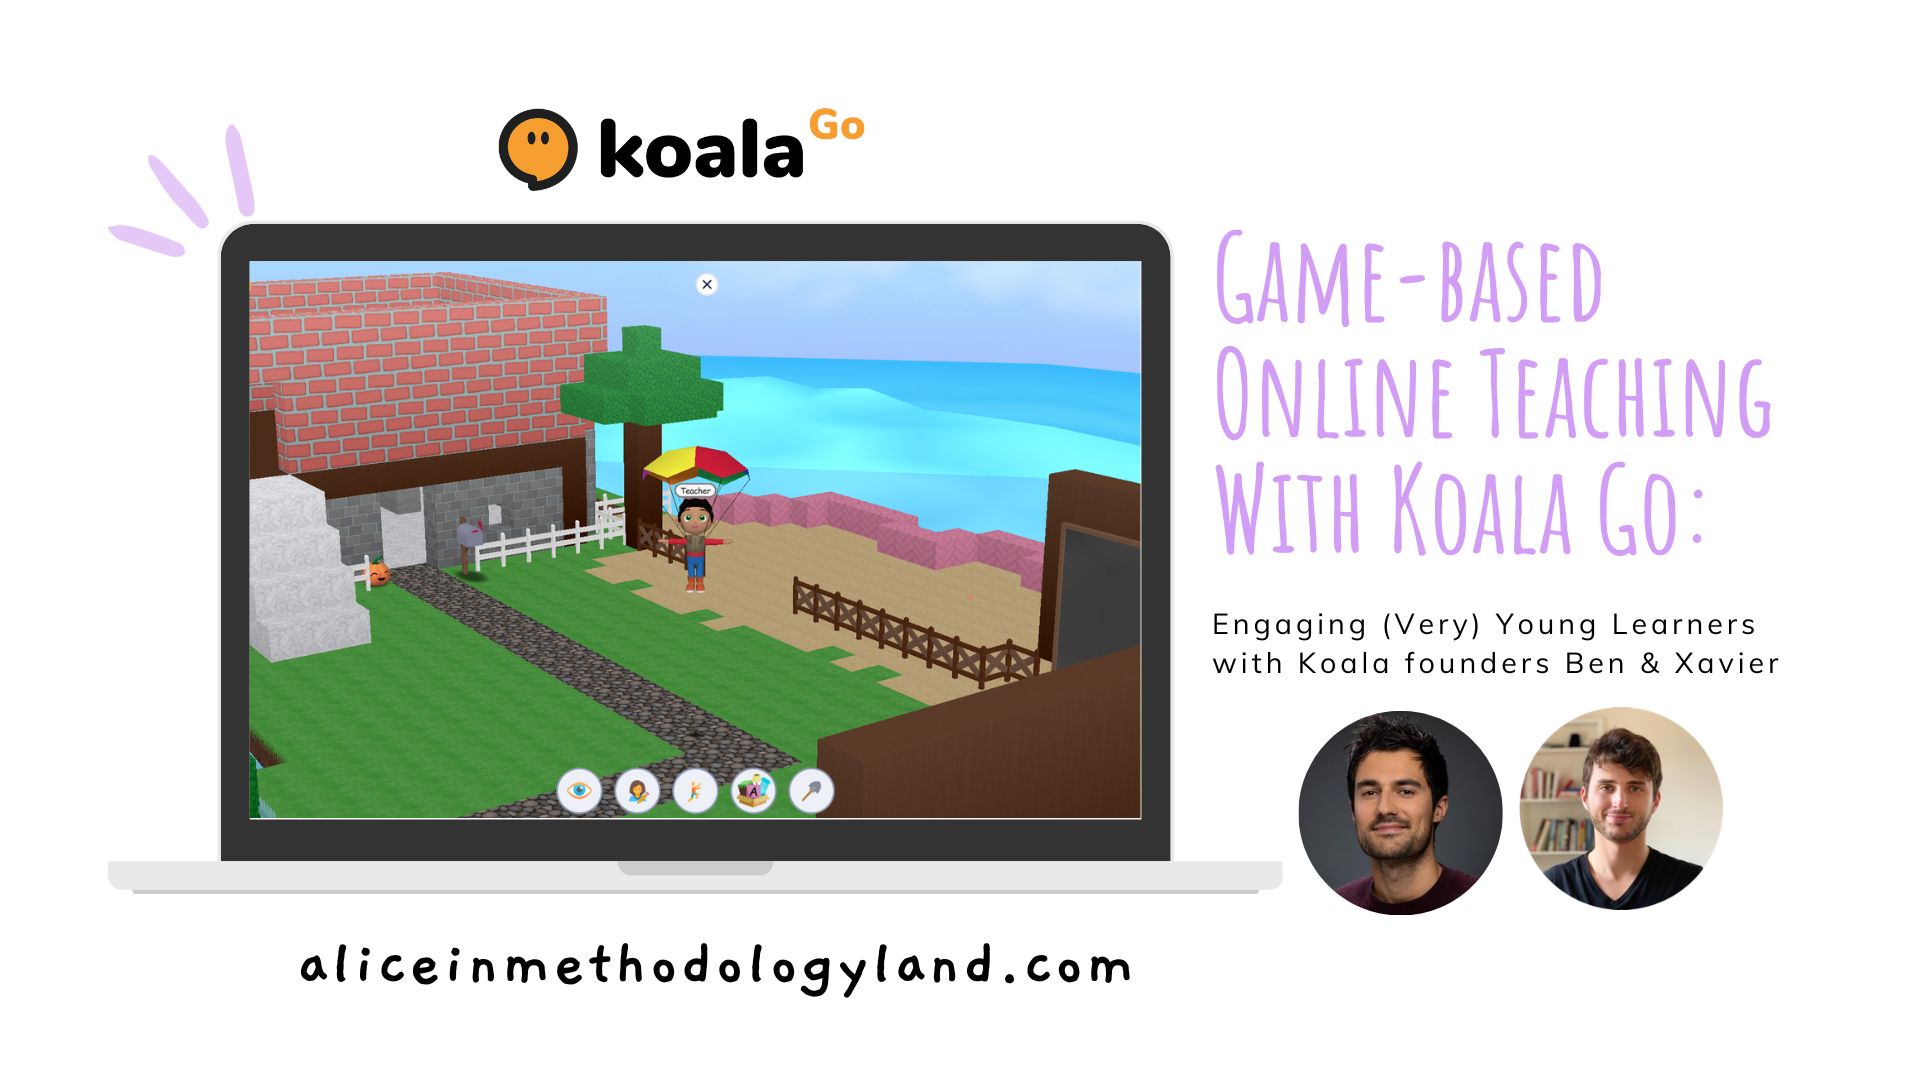 Game-based Online Teaching With Koala Go: Engaging (Very) Young Learners with Koala Founders Ben & Xavier